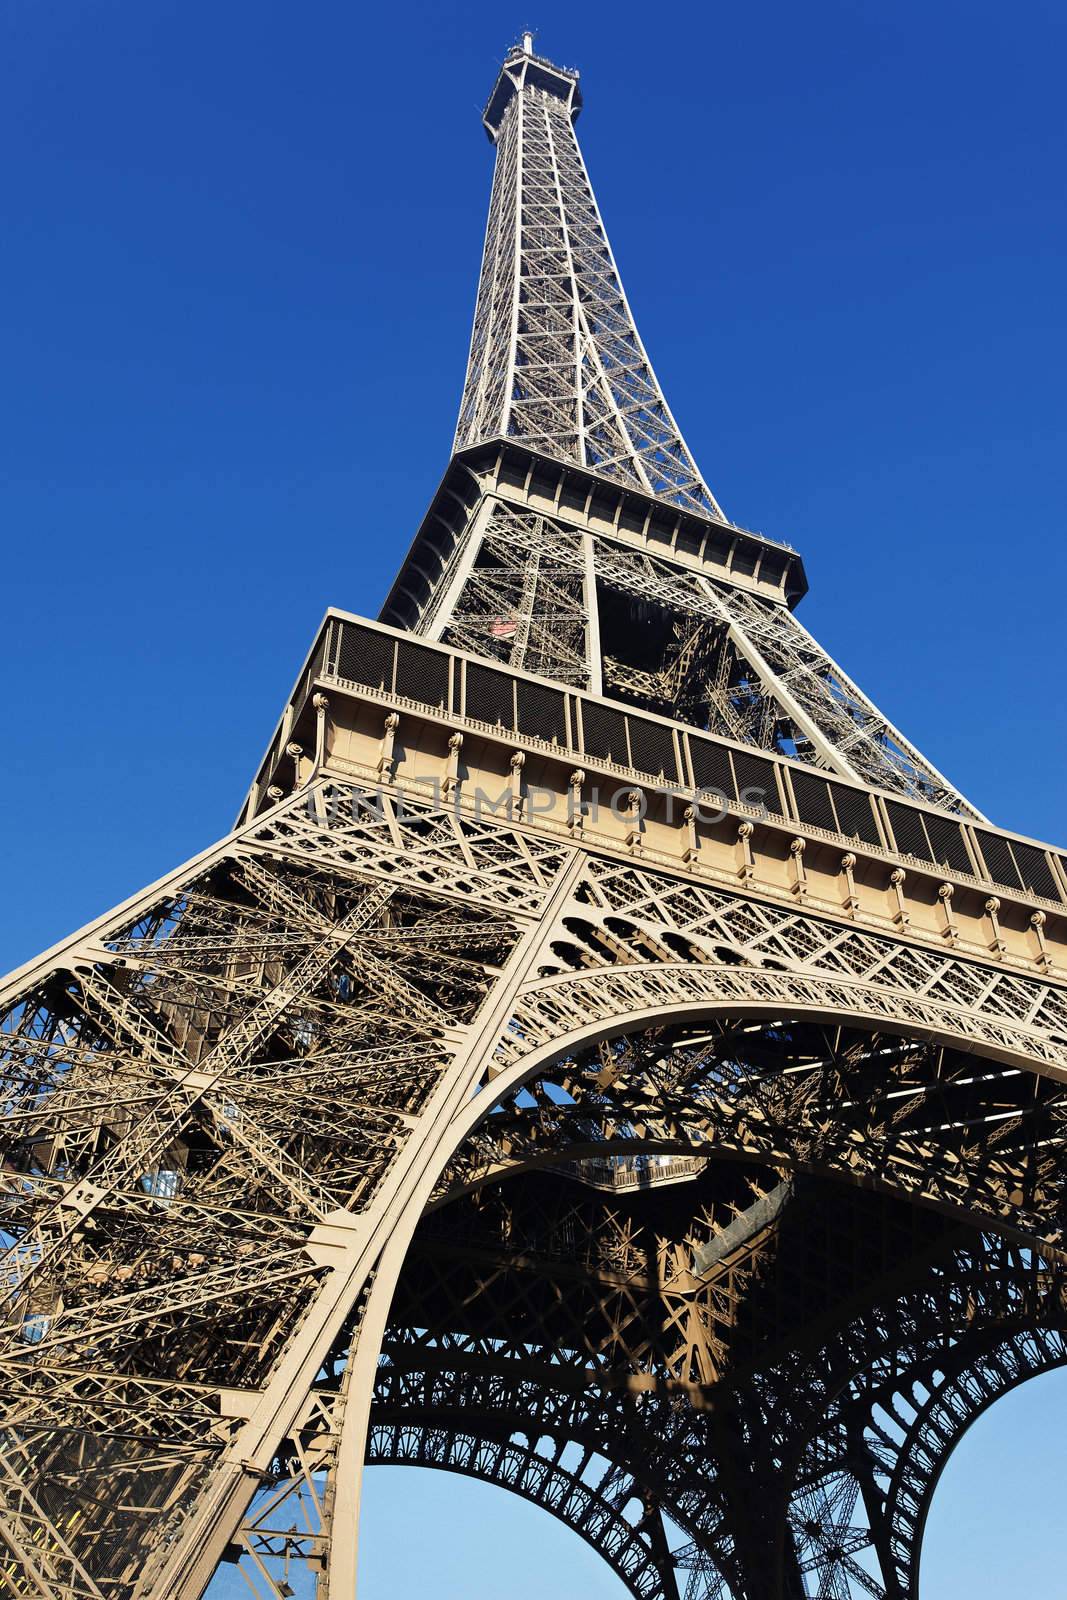 The Eiffel tower with blue sky in Paris